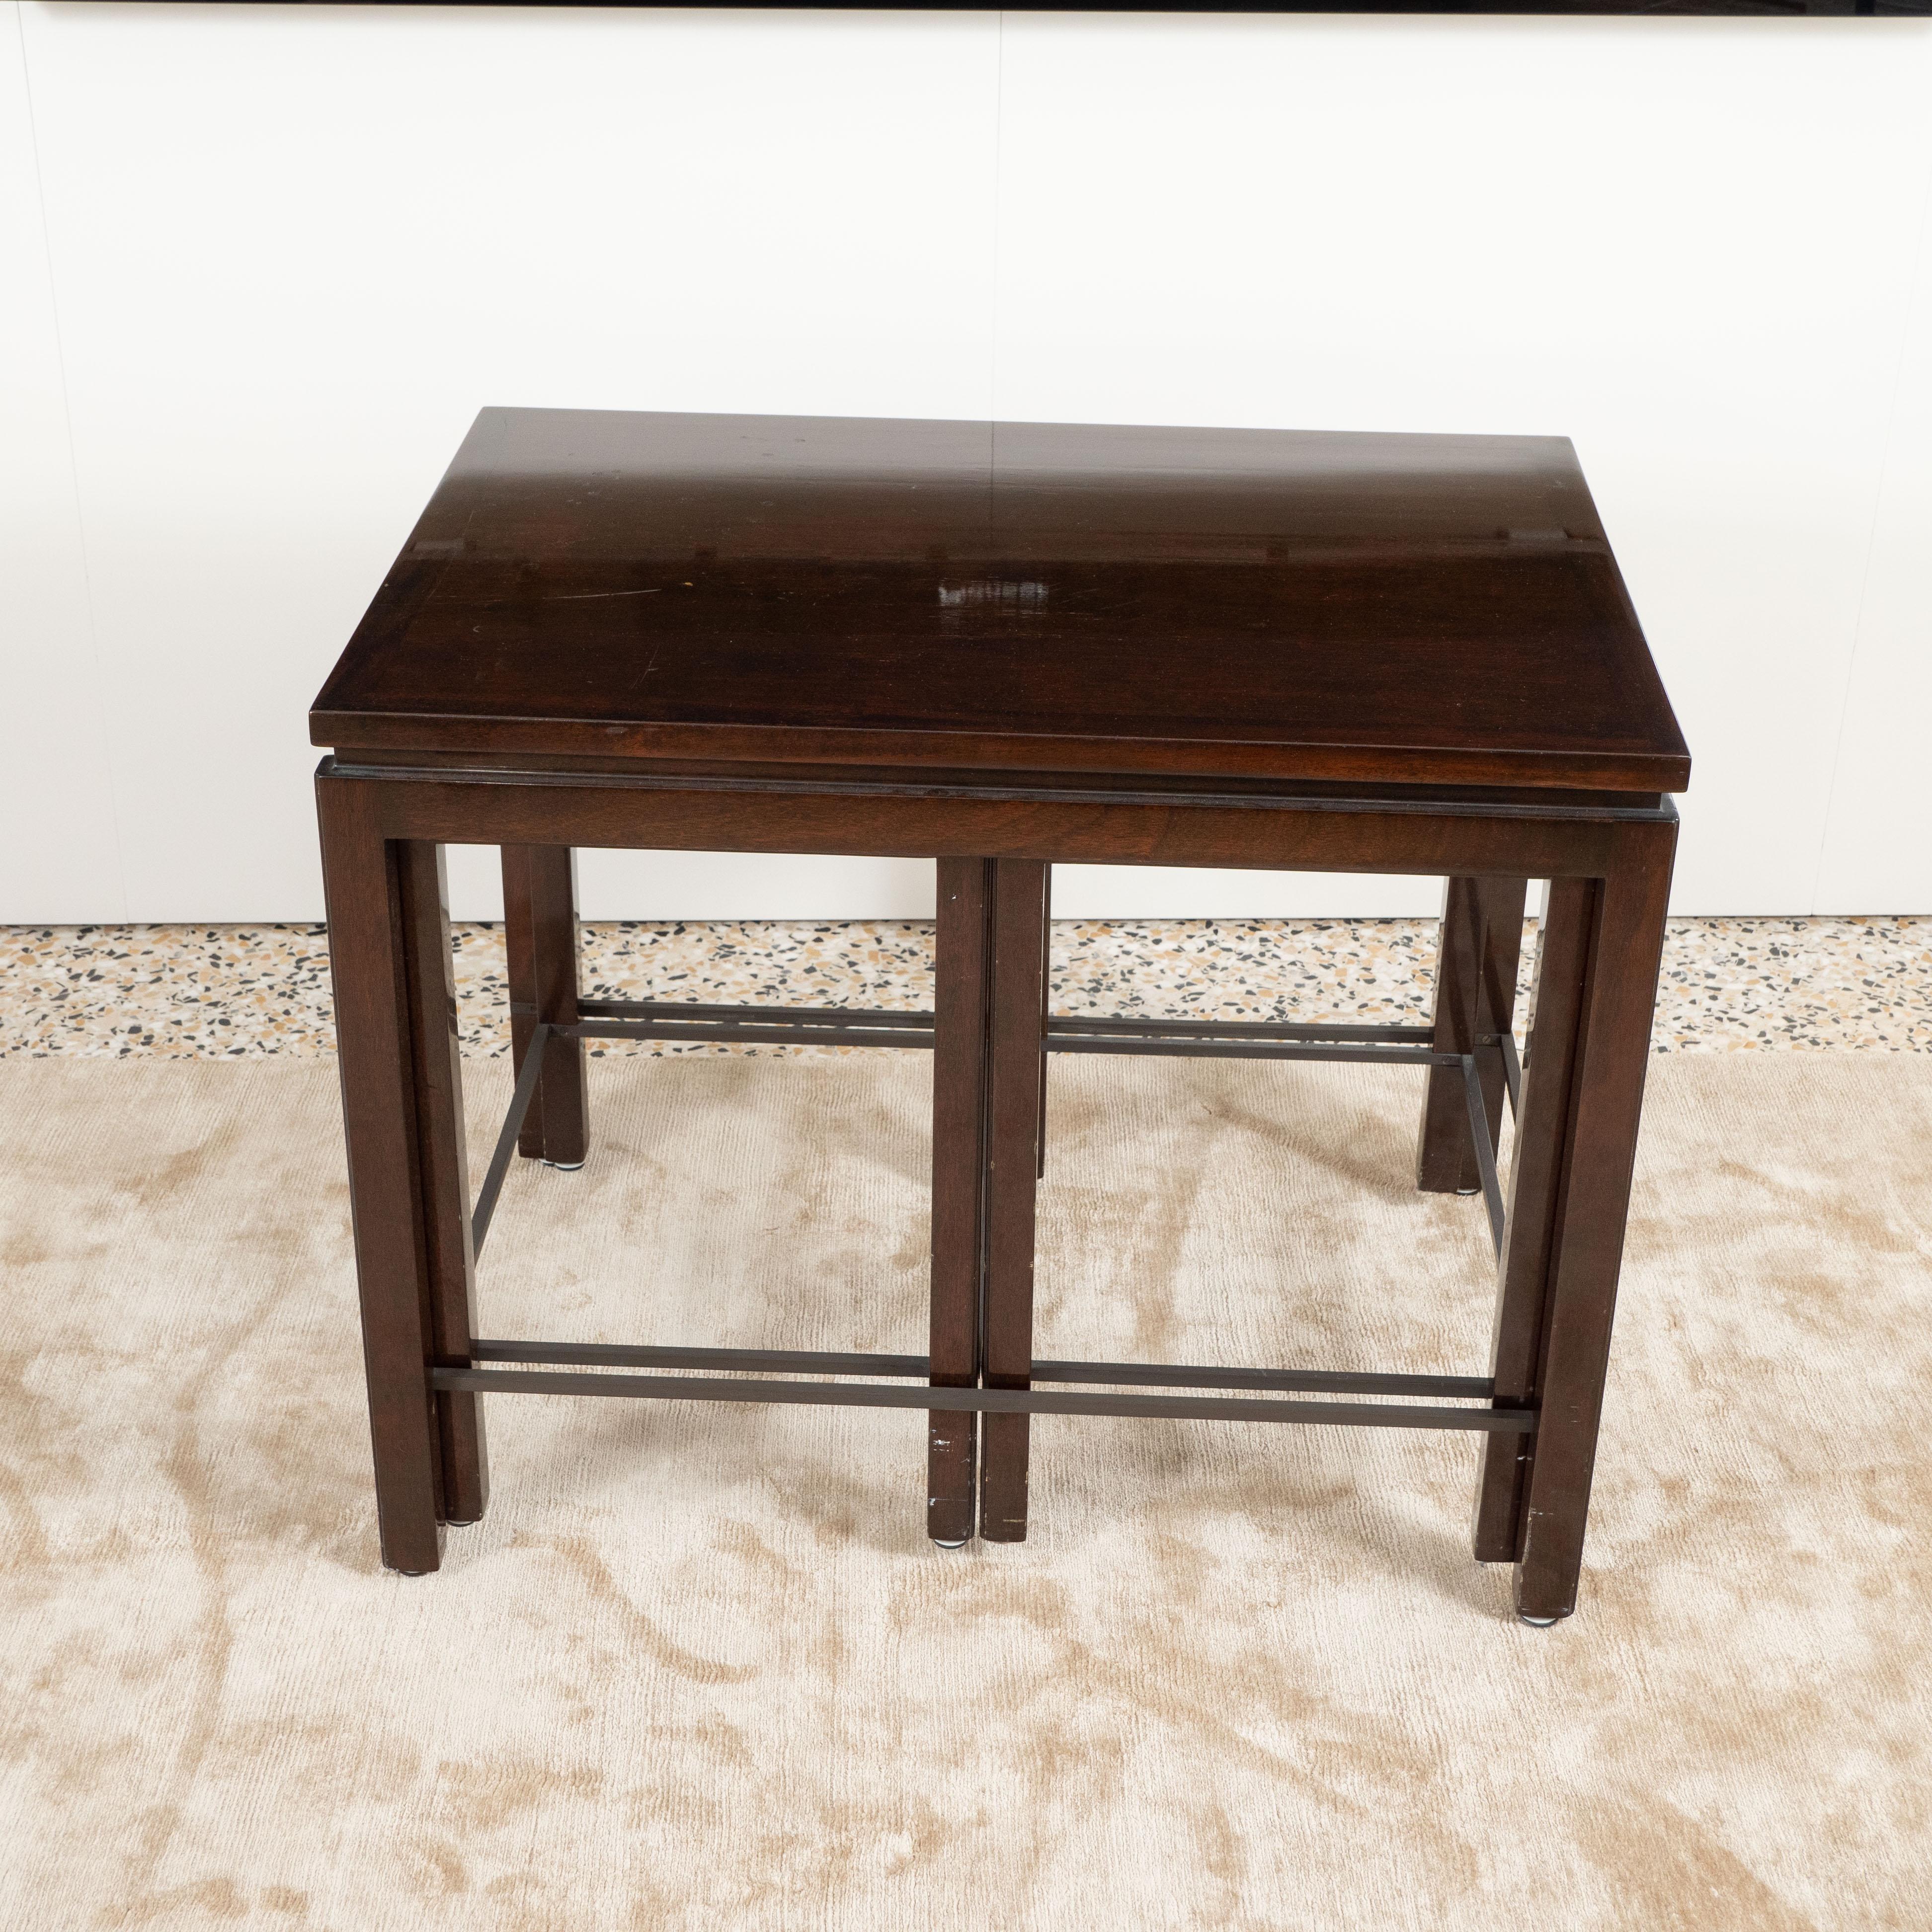 Dunbar Janus Set of 3 Nesting Tables by Edward Wormley from Alan Moss 6